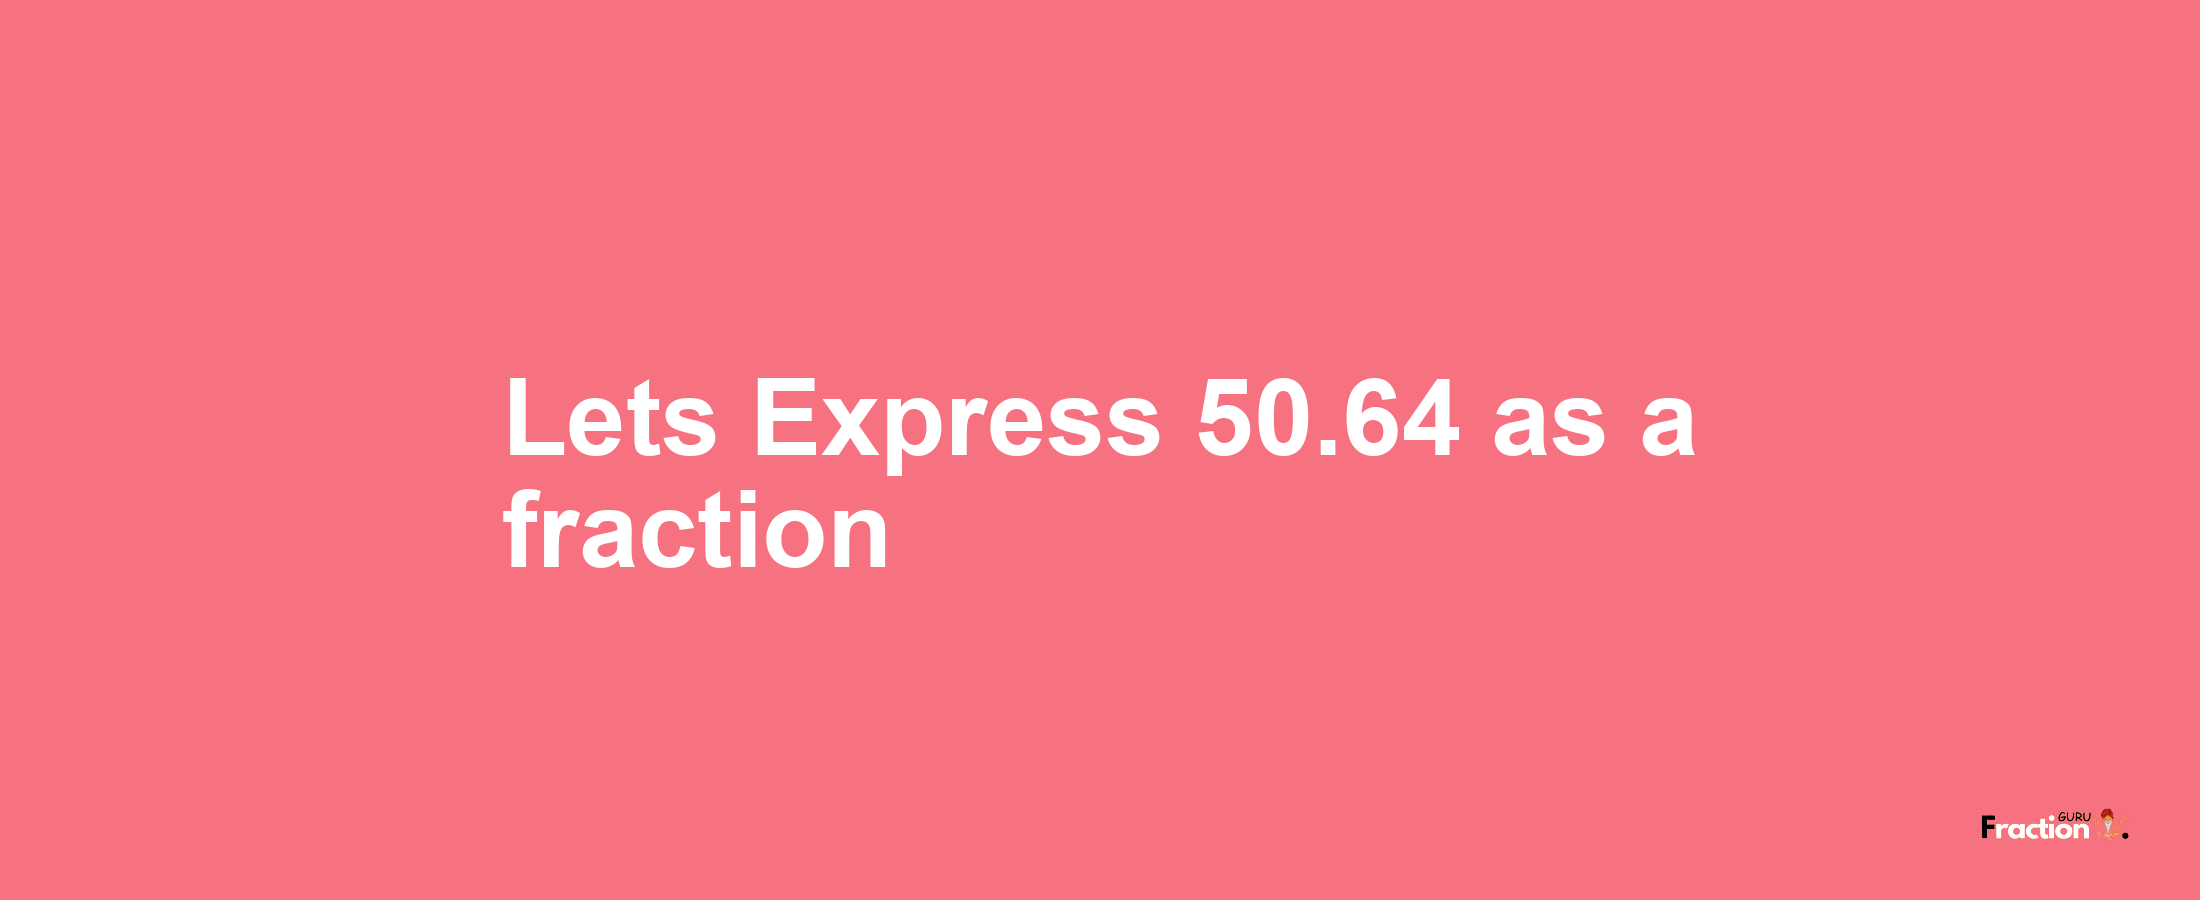 Lets Express 50.64 as afraction